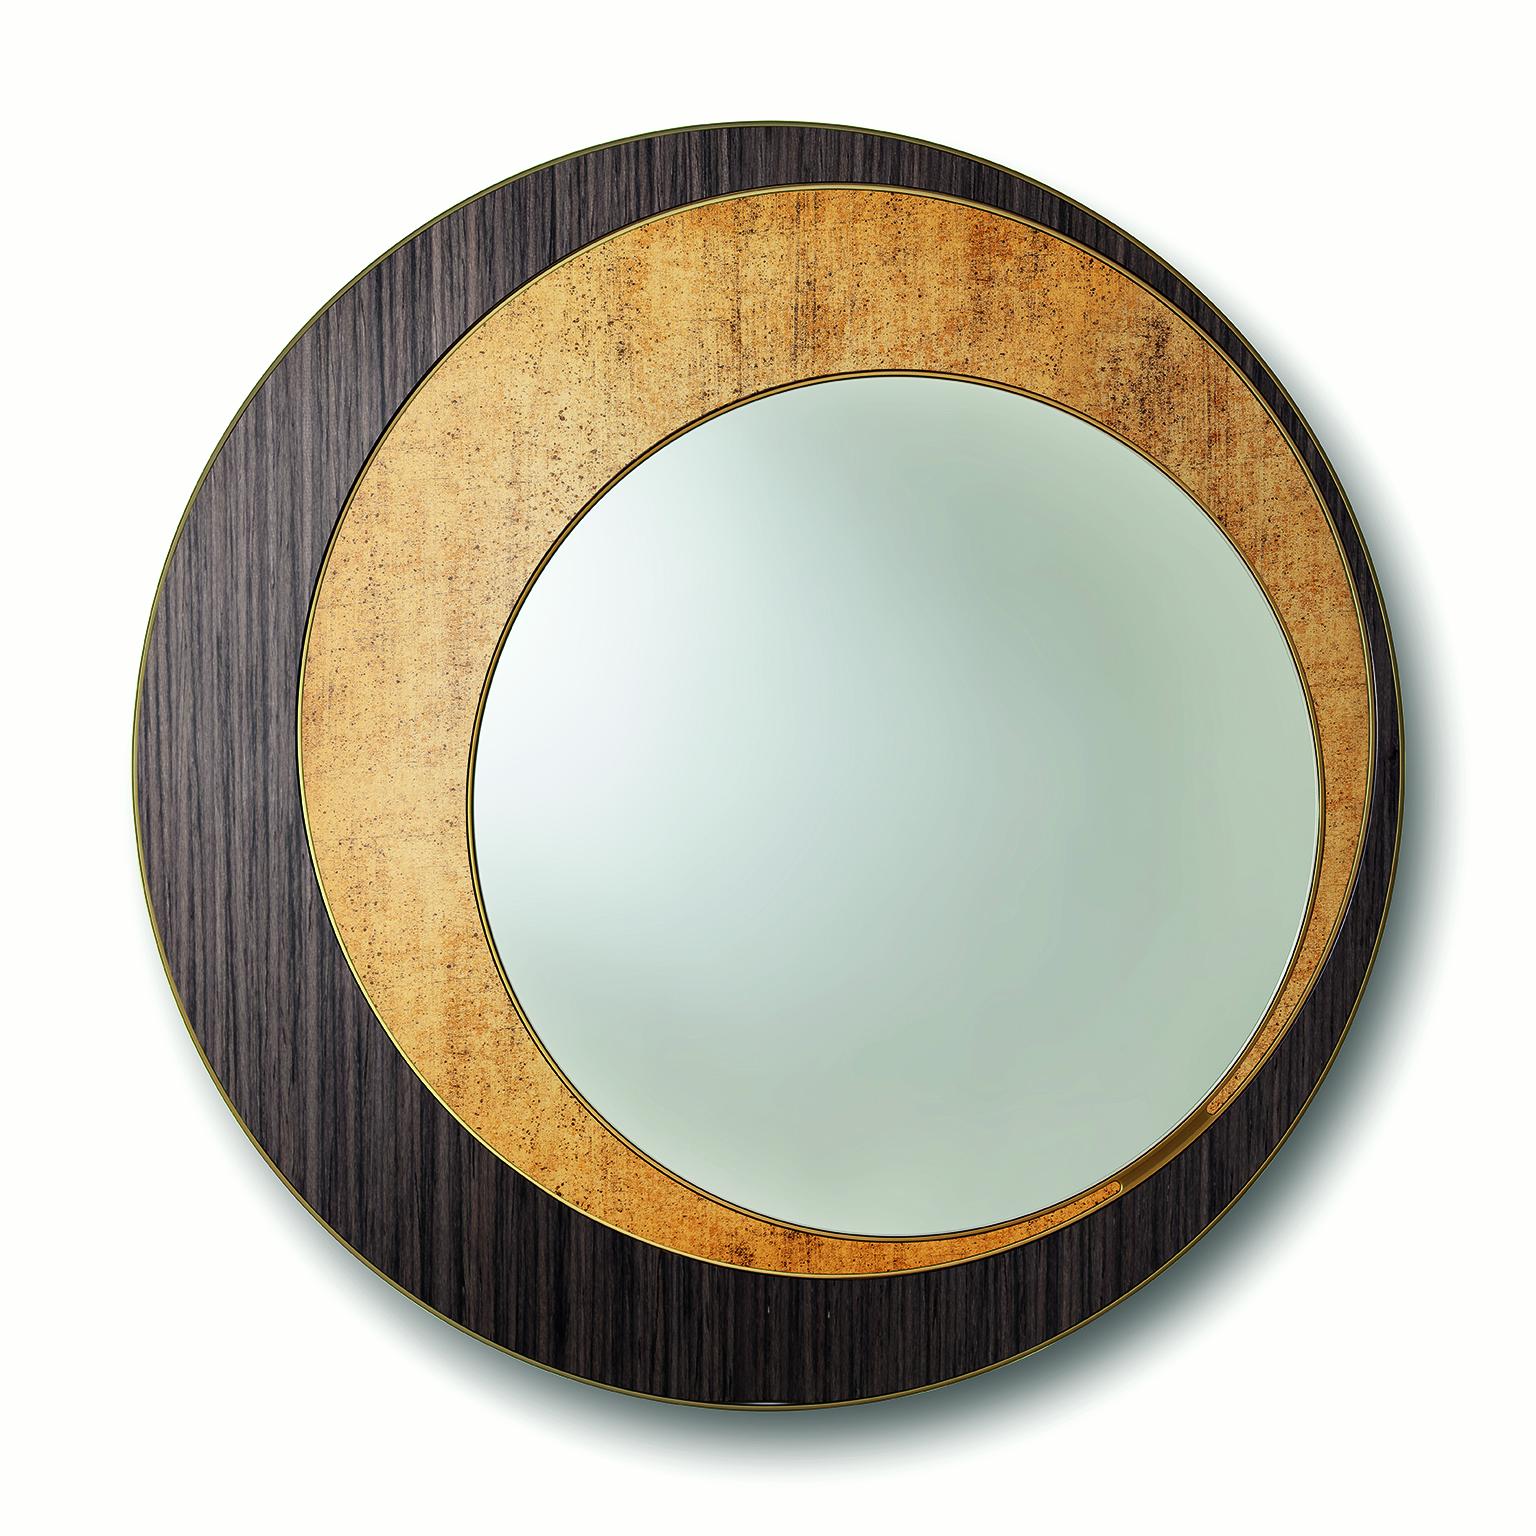 Italian Mirror with Frame of Polished Solid Wood, Bronze Finish, Decorative Insert For Sale